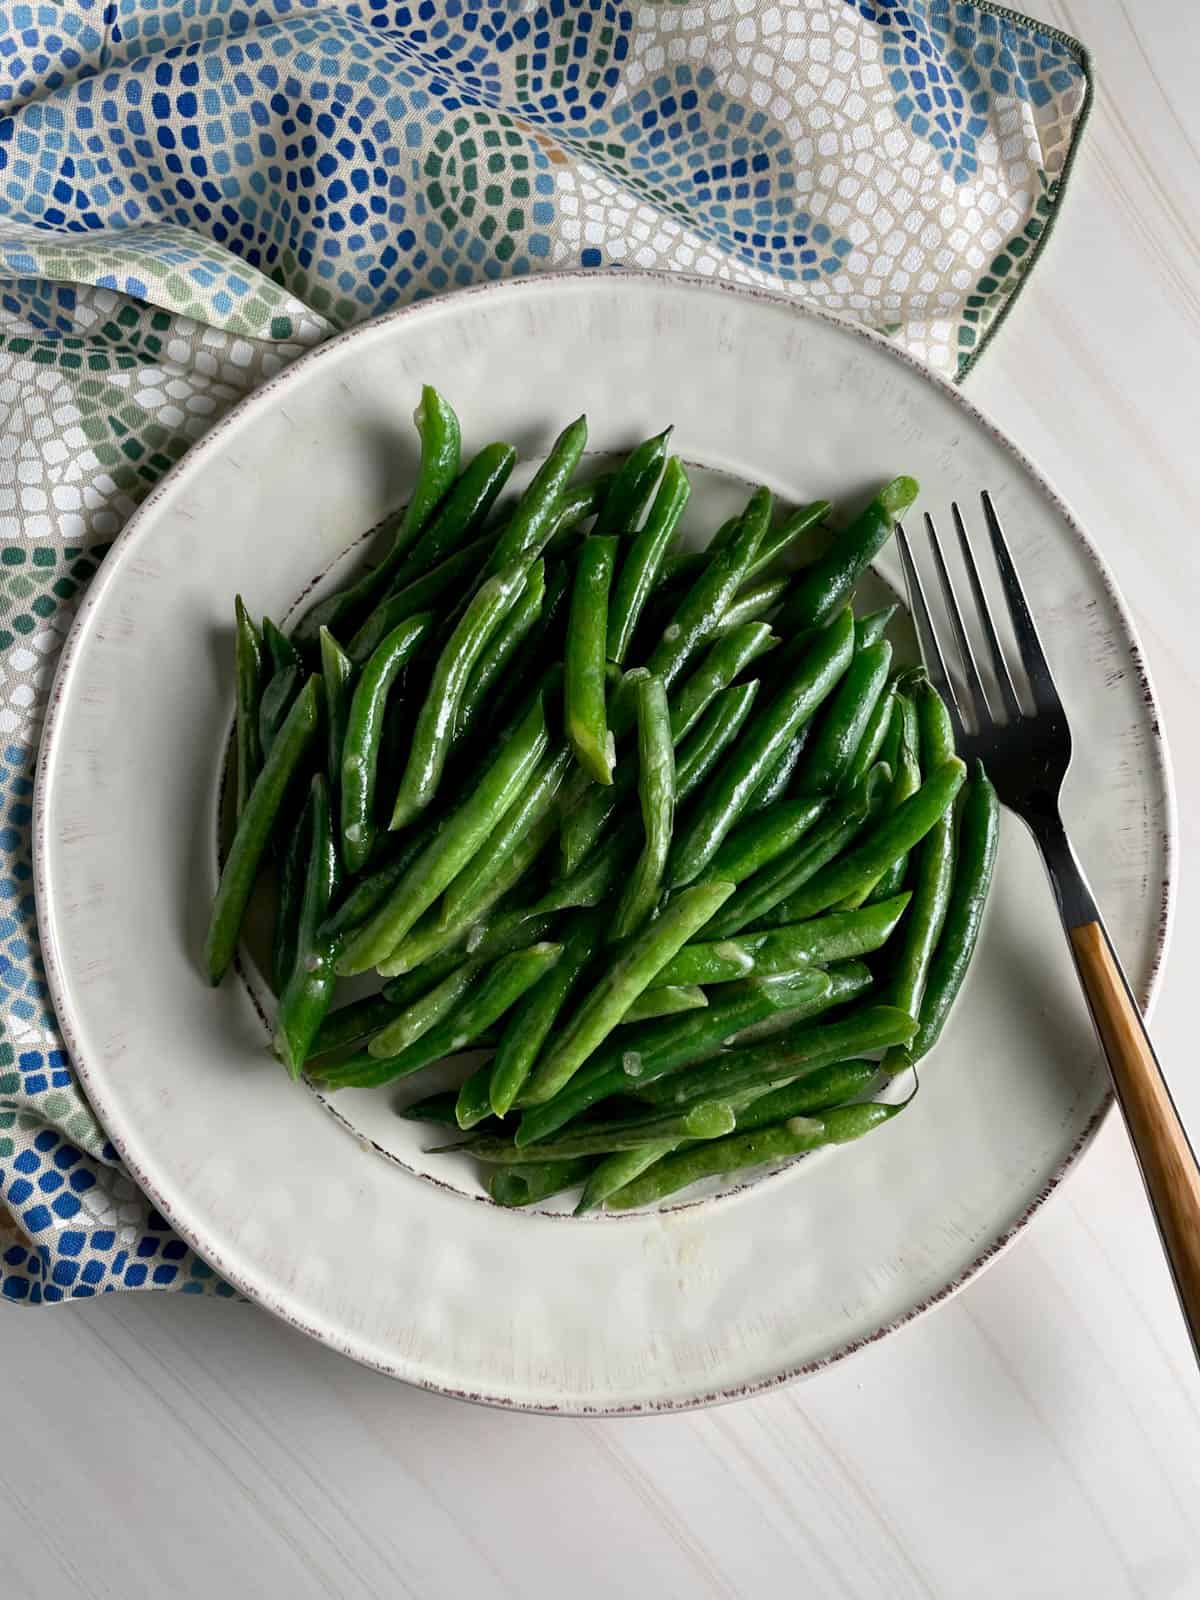 Plate of green beans with mustard sauce and a fork.